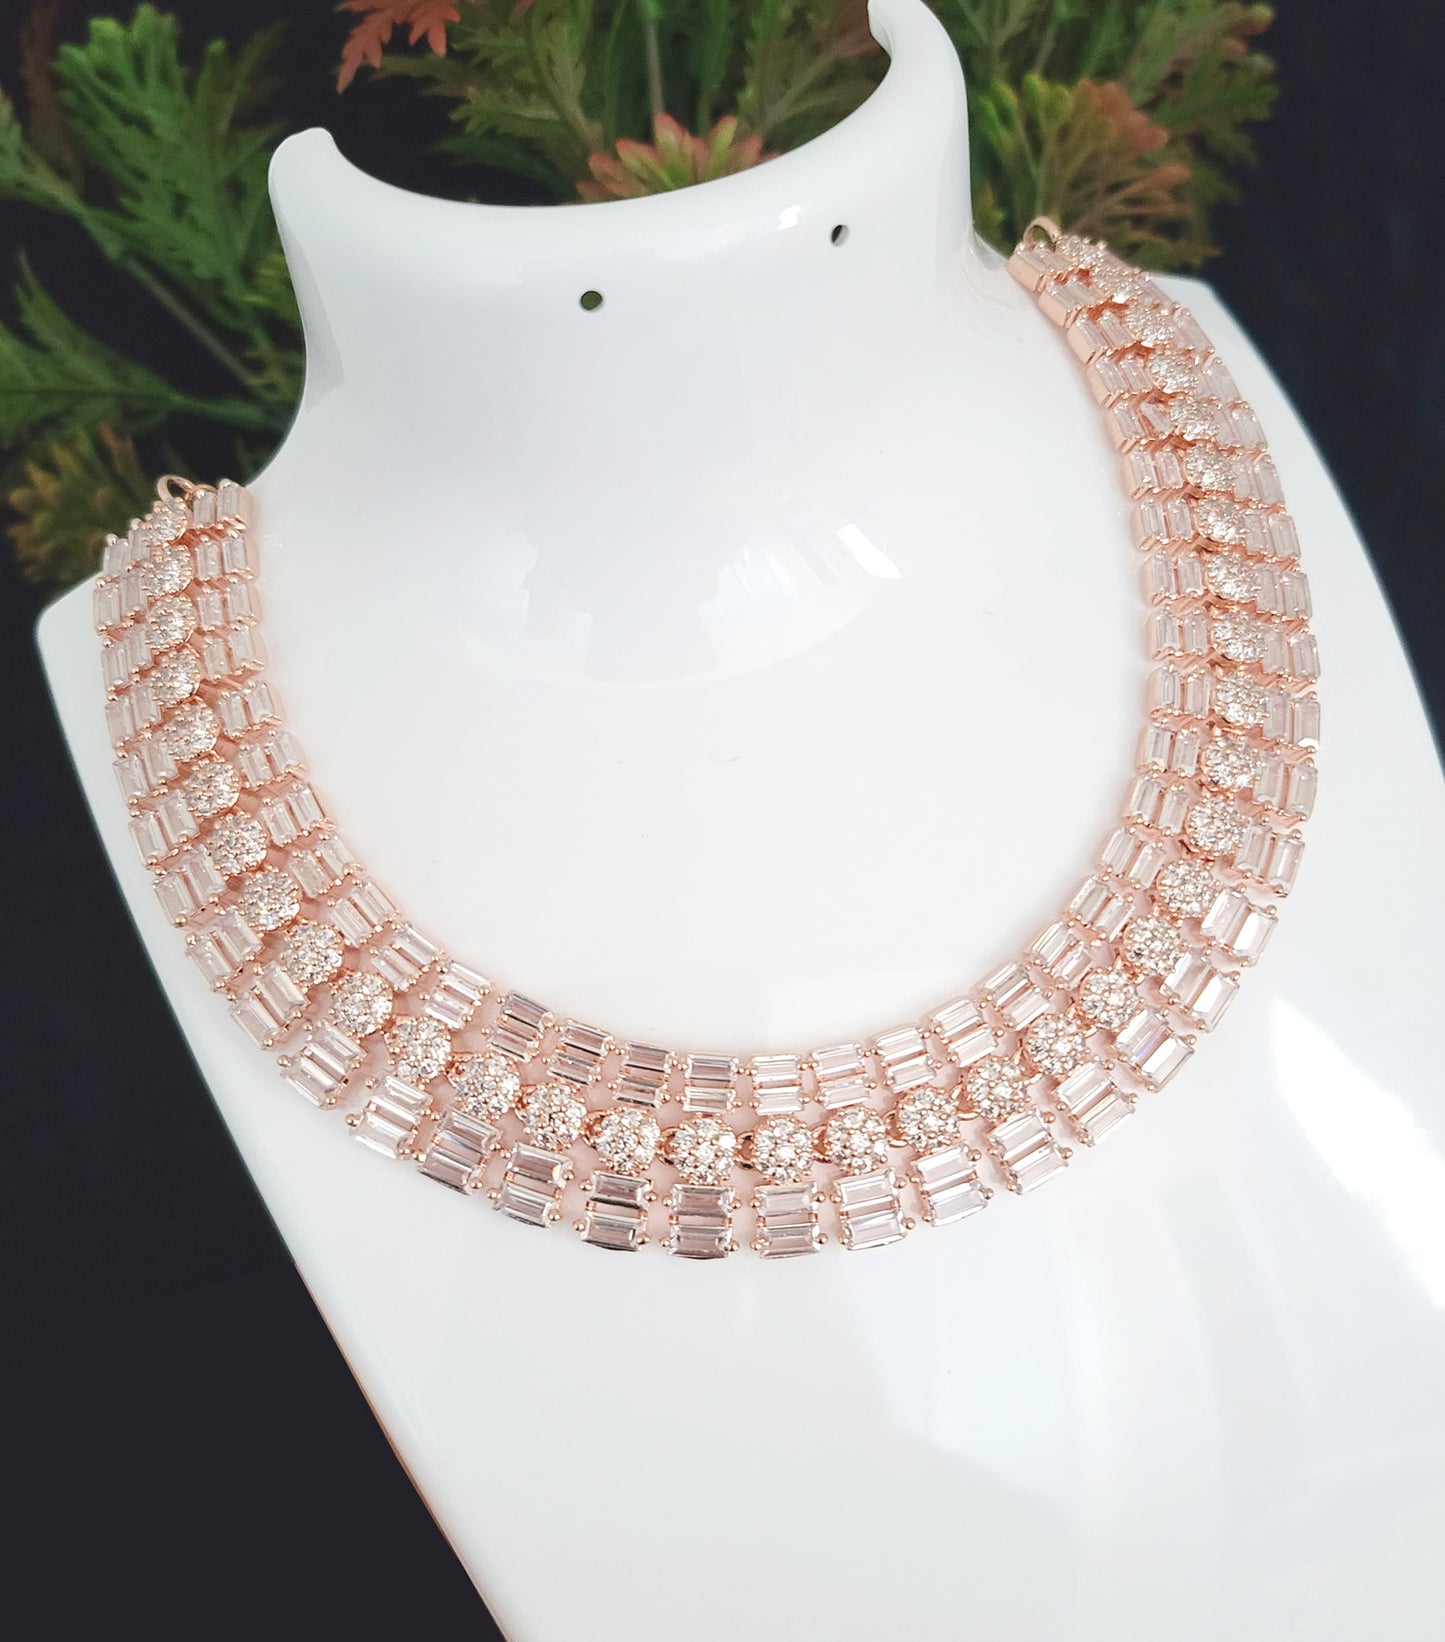 Beauty of Crystals Necklace - Diamond-Like Sparkle on Rose Gold Plating